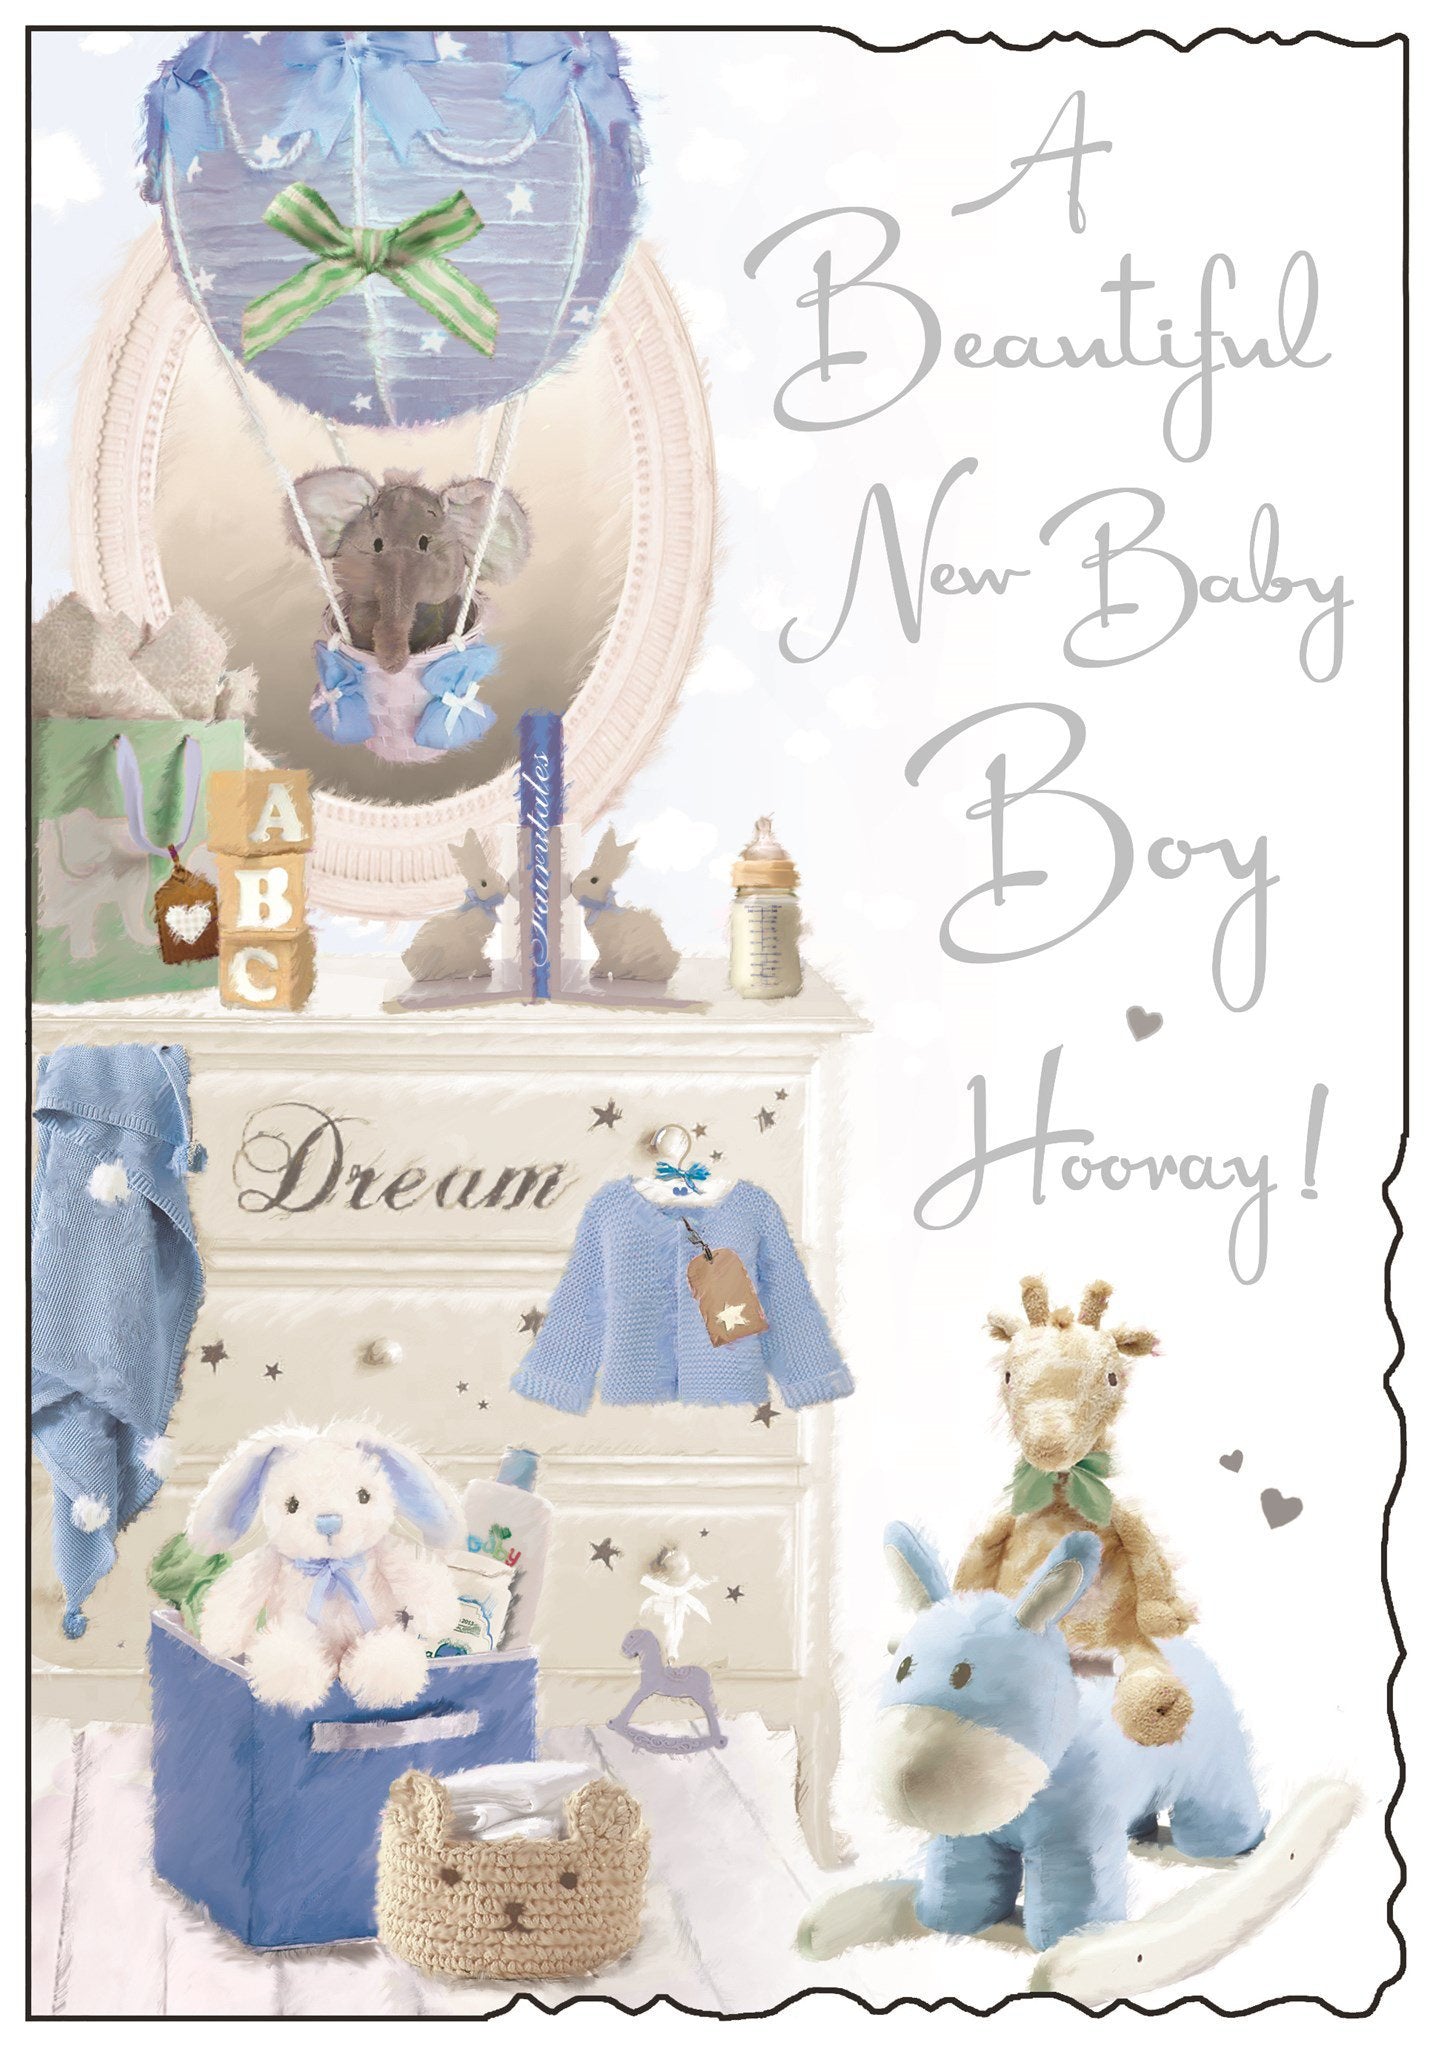 Front of New Baby Boy Hooray Greetings Card